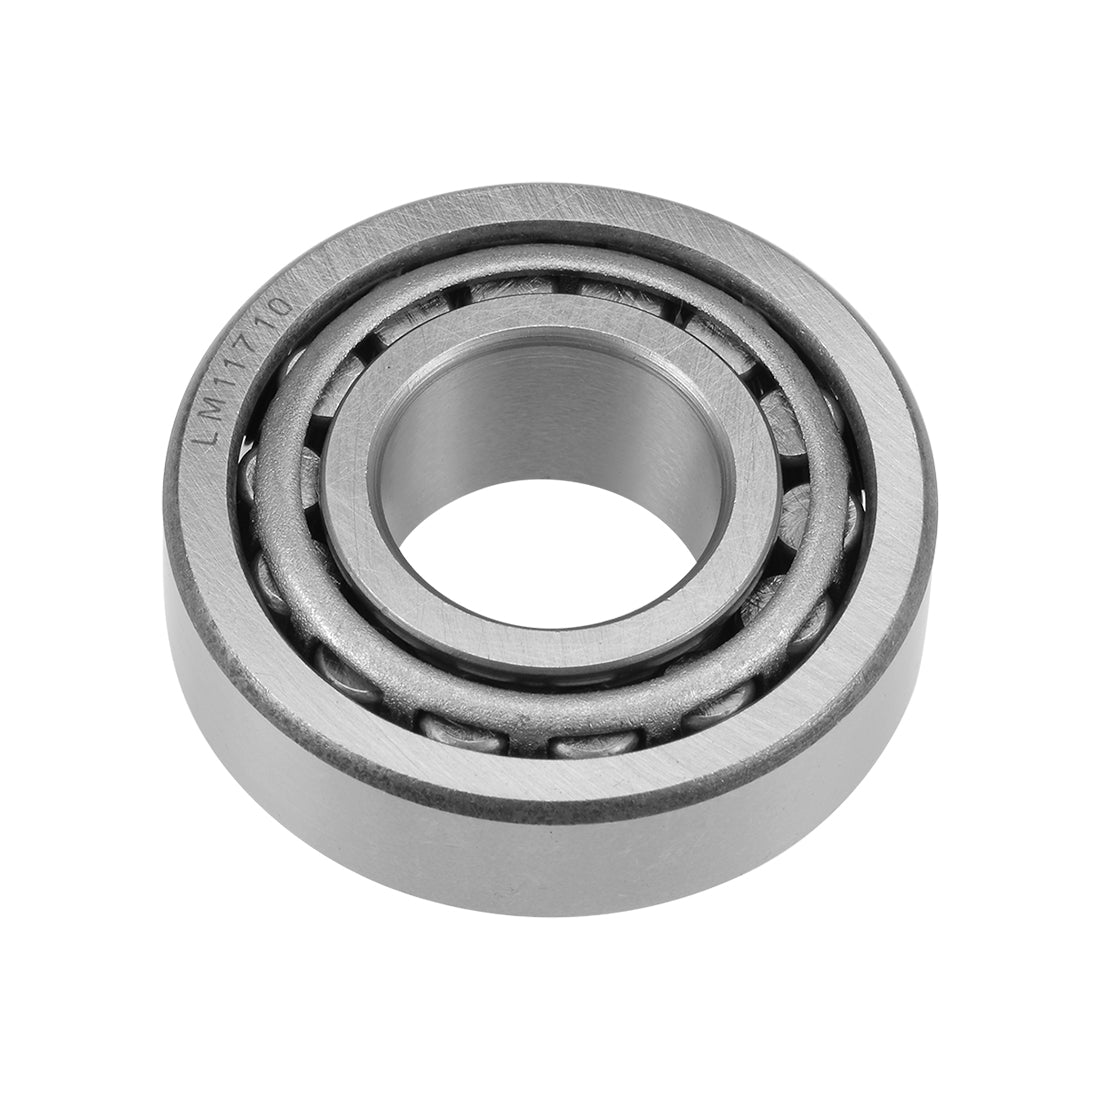 uxcell Uxcell LM11749/LM11710 Tapered Roller Bearing Cone and Cup Set 0.6875" Bore 1.57" O.D.